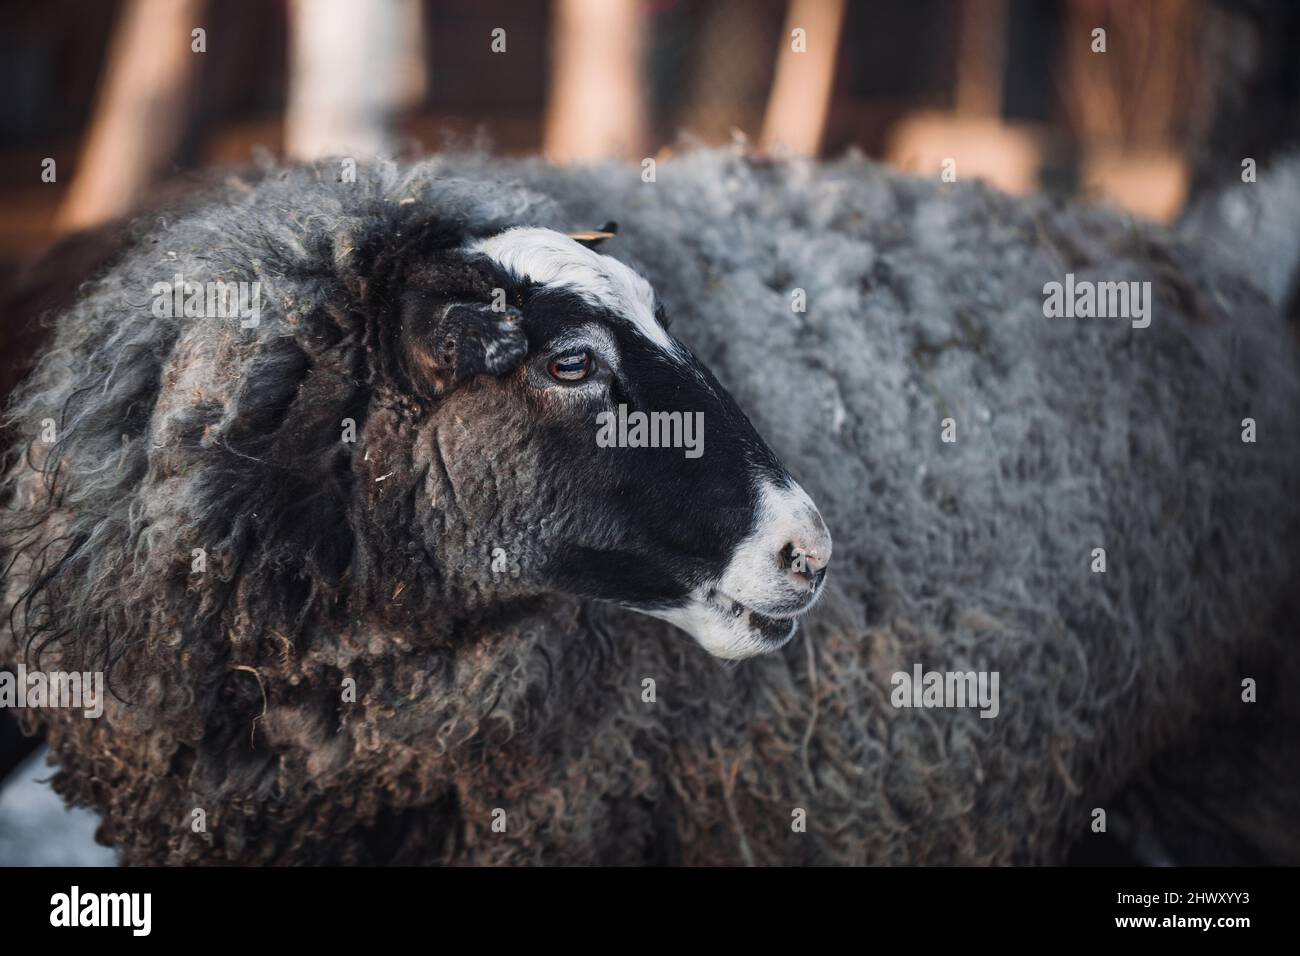 Sheep farming is a very popular livelihood in the world. Romanov sheep give birth to many offspring at a time. Romanov lambs are very small at birth. Stock Photo